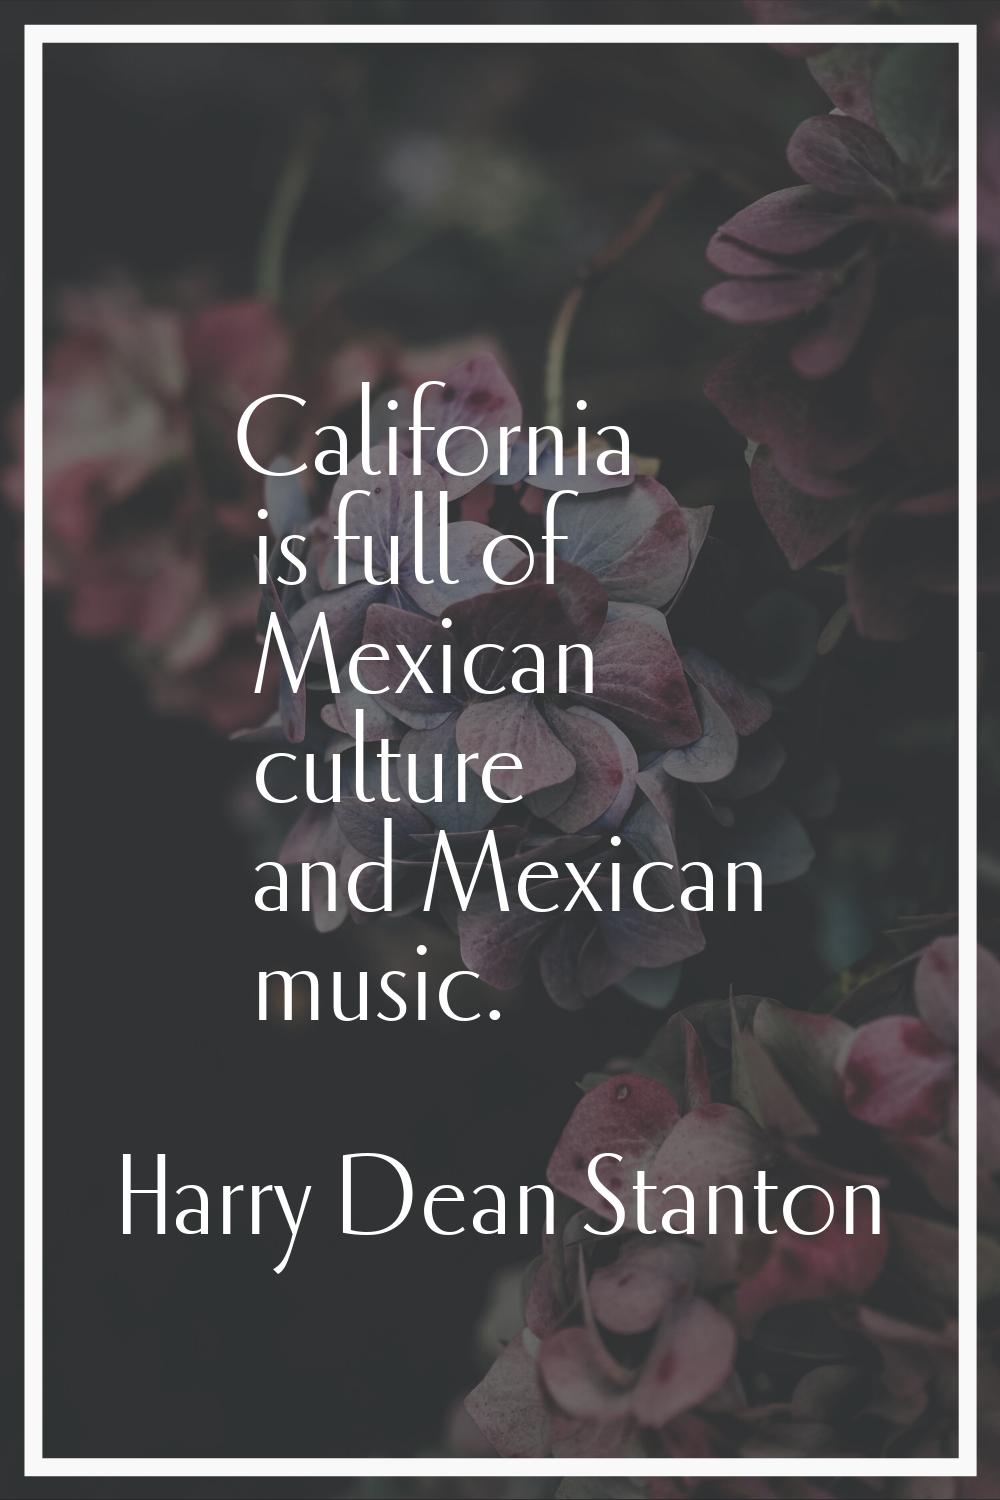 California is full of Mexican culture and Mexican music.